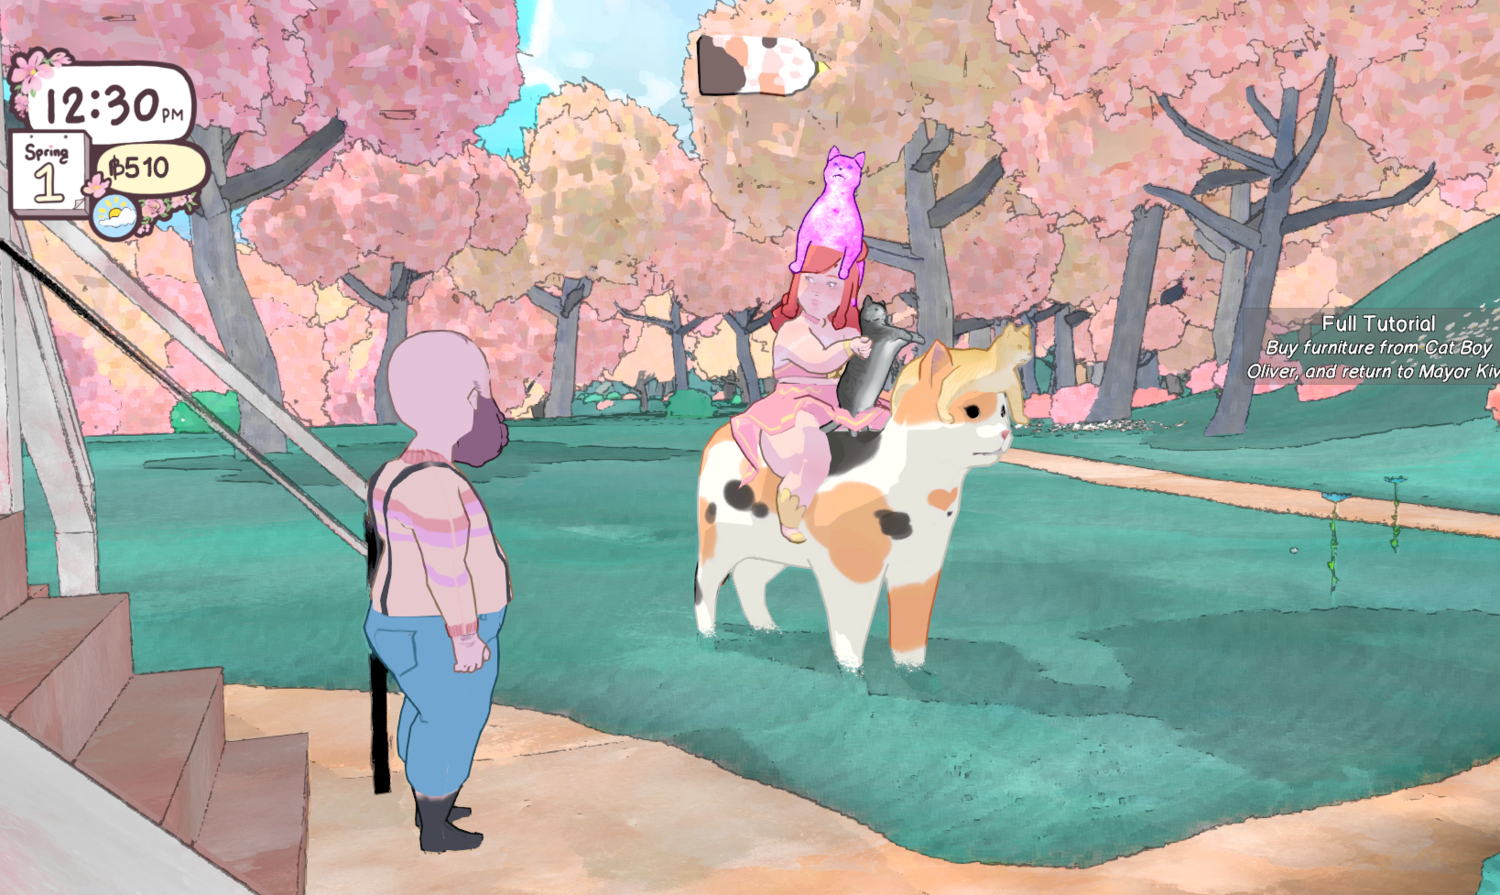 A screenshot from Calico. A woman in a pink dress riding a cat talks to a dog-man wearing suspenders in front of a pink forest. Both the woman and the cat have other cats on their head.